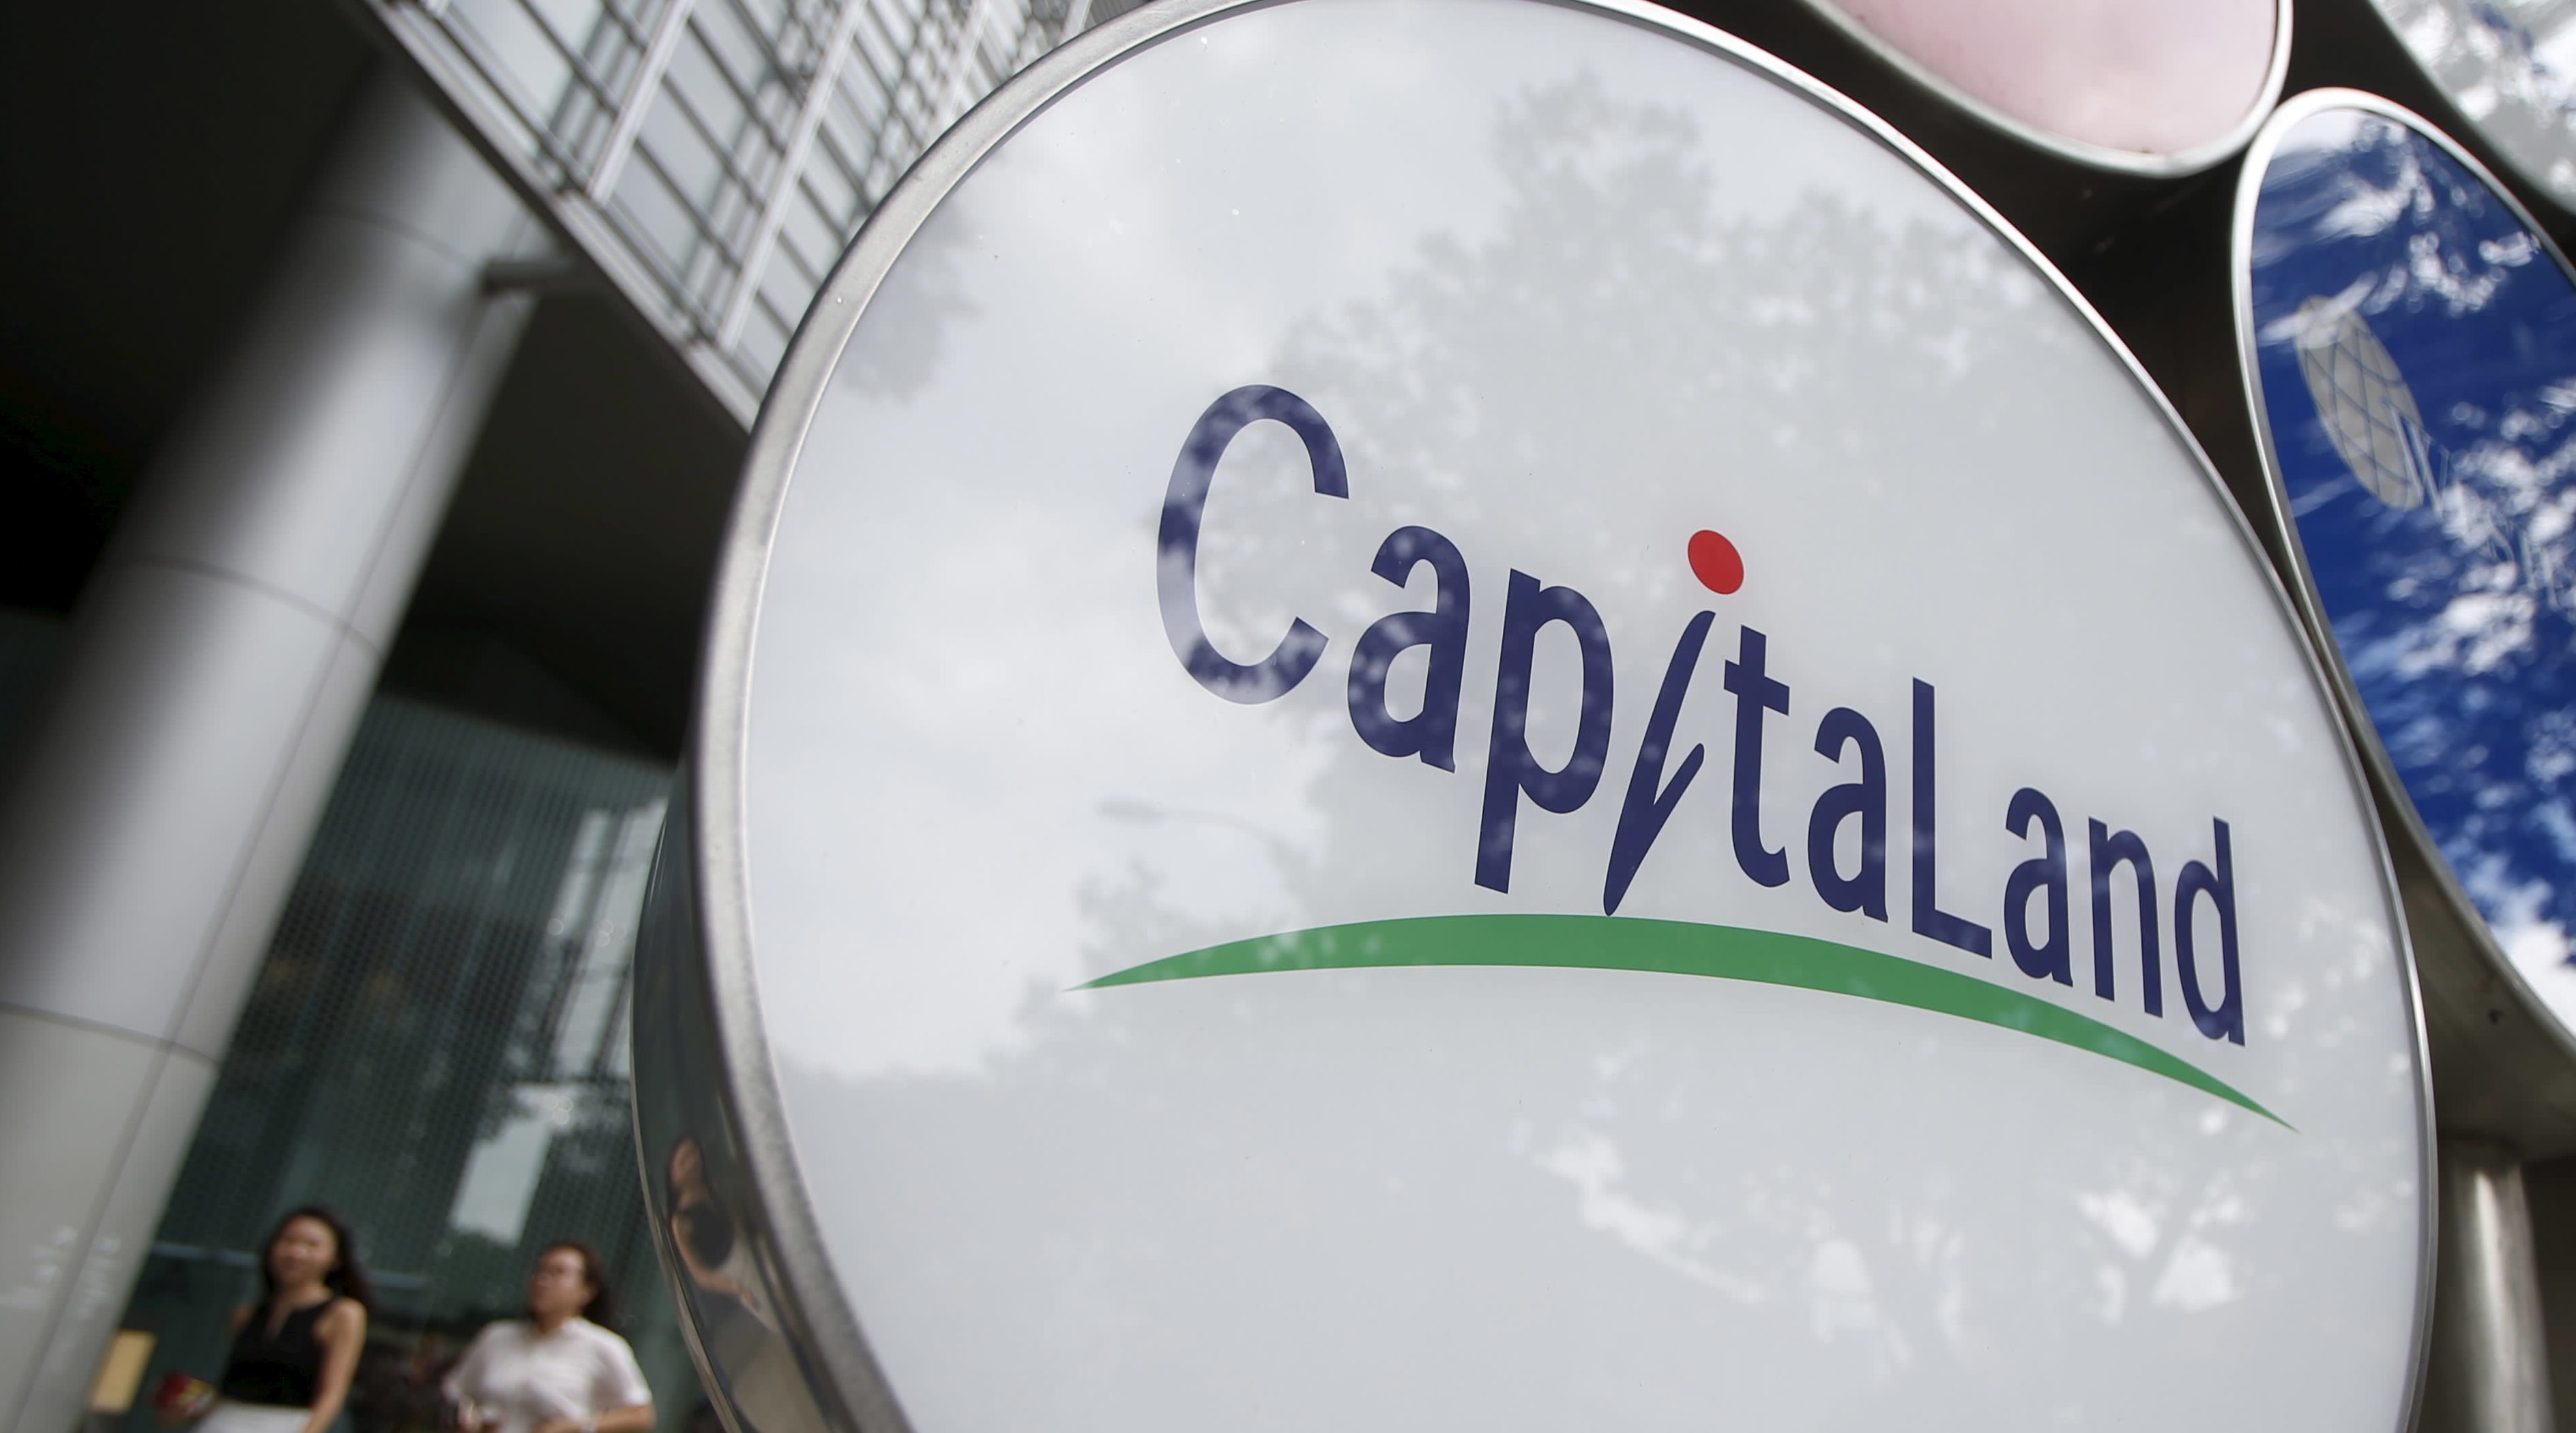 People Digest: CapitaLand, JPMorgan Private Banking make top hires